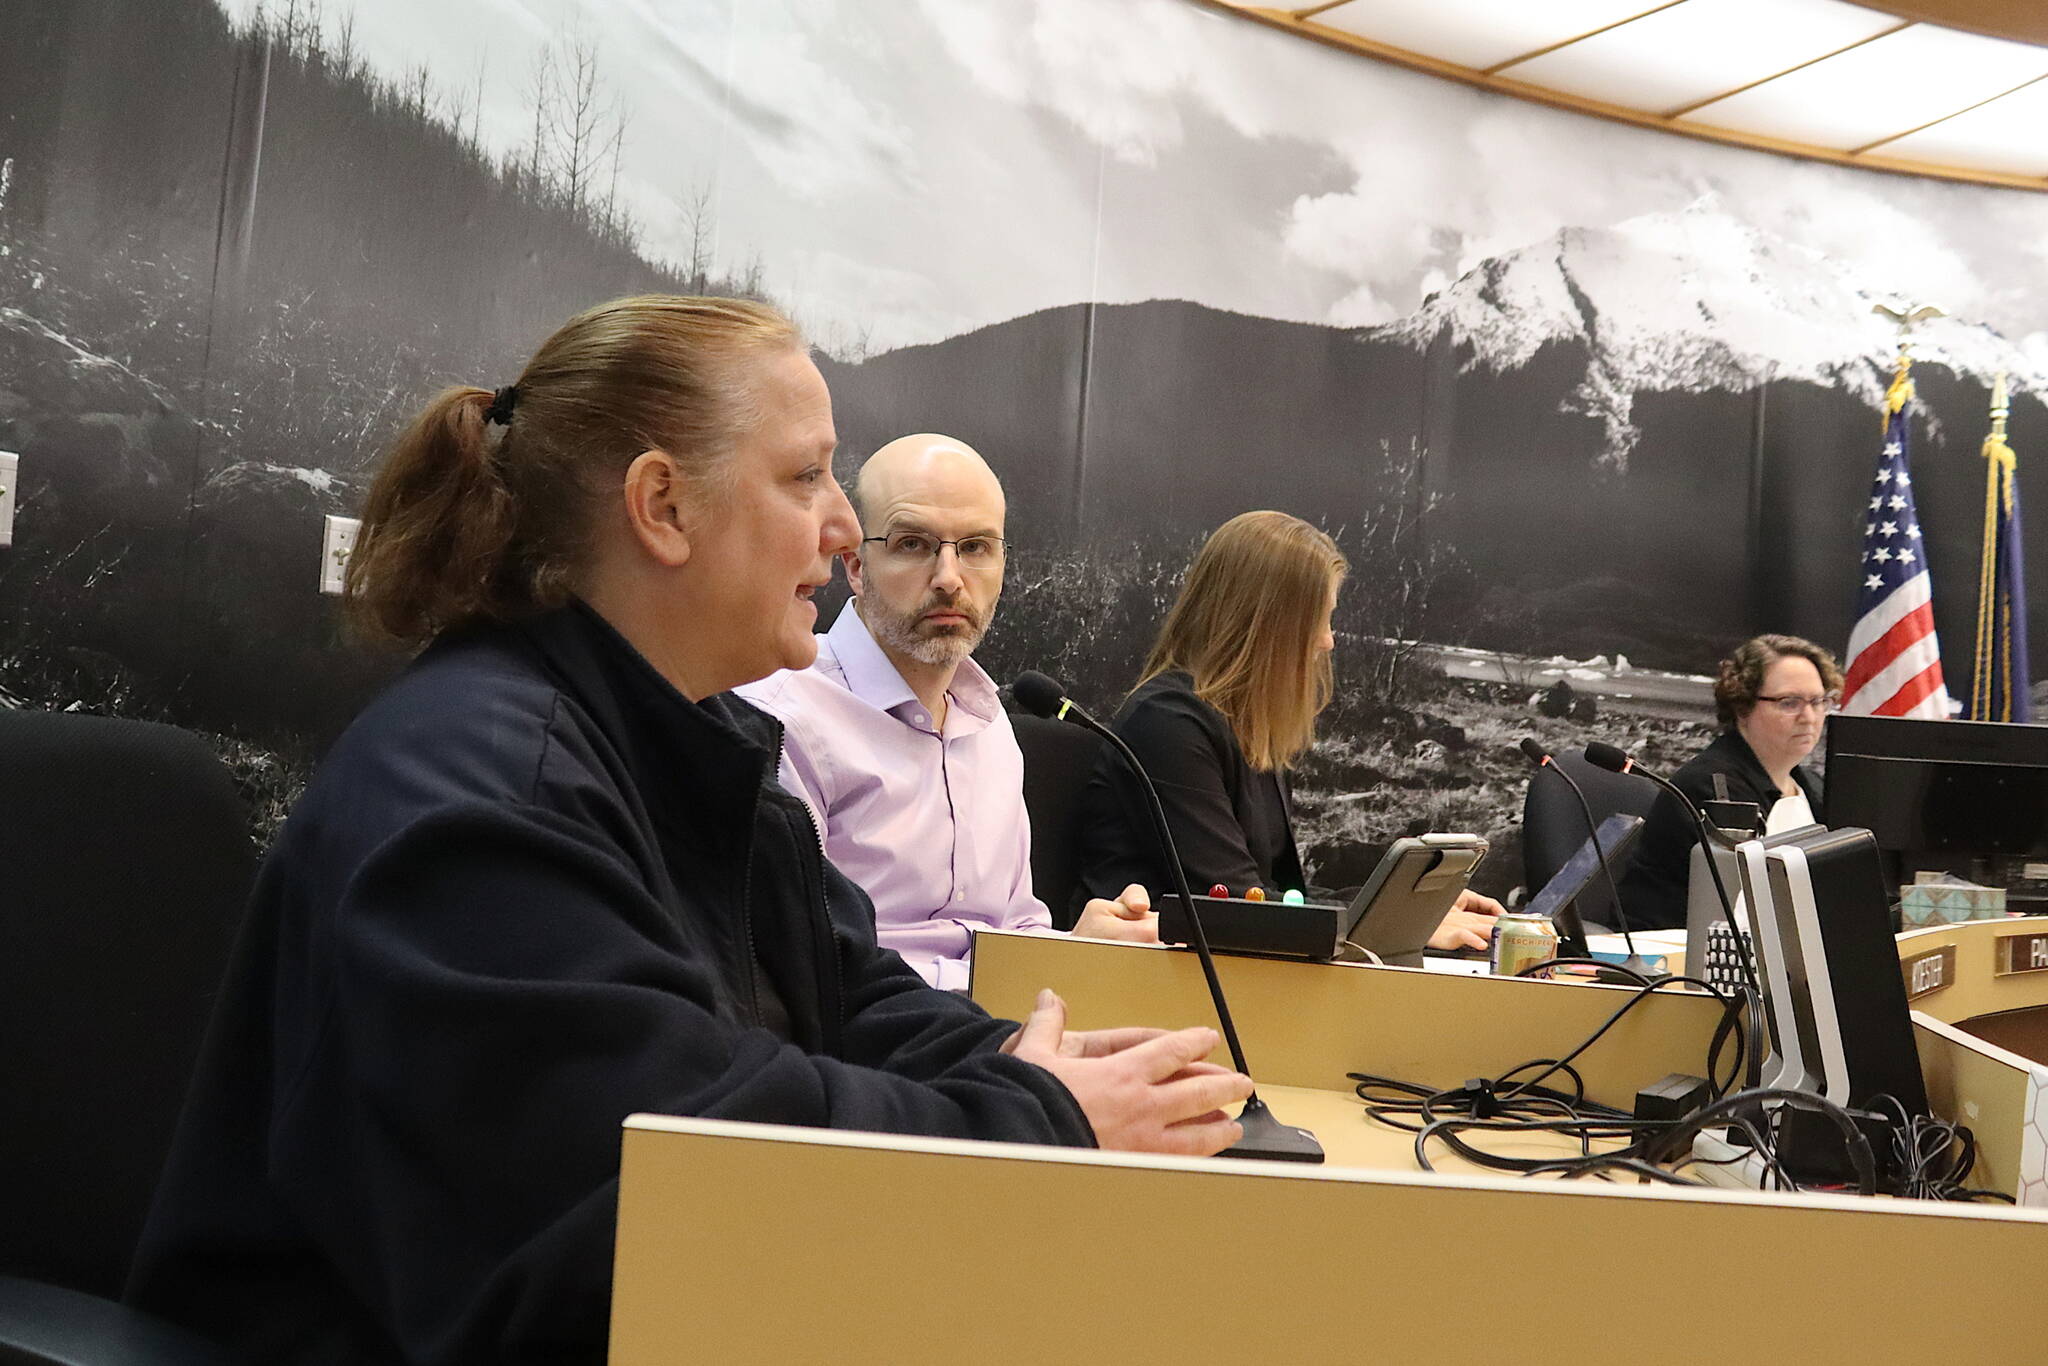 Venietia Bingham, owner of V’s Cellar Door, testifies in opposition to a resolution seeking to nearly double the number of licenses for establishments allowed to serve alcohol during a Juneau Assembly meeting on Monday night. (Mark Sabbatini / Juneau Empire)